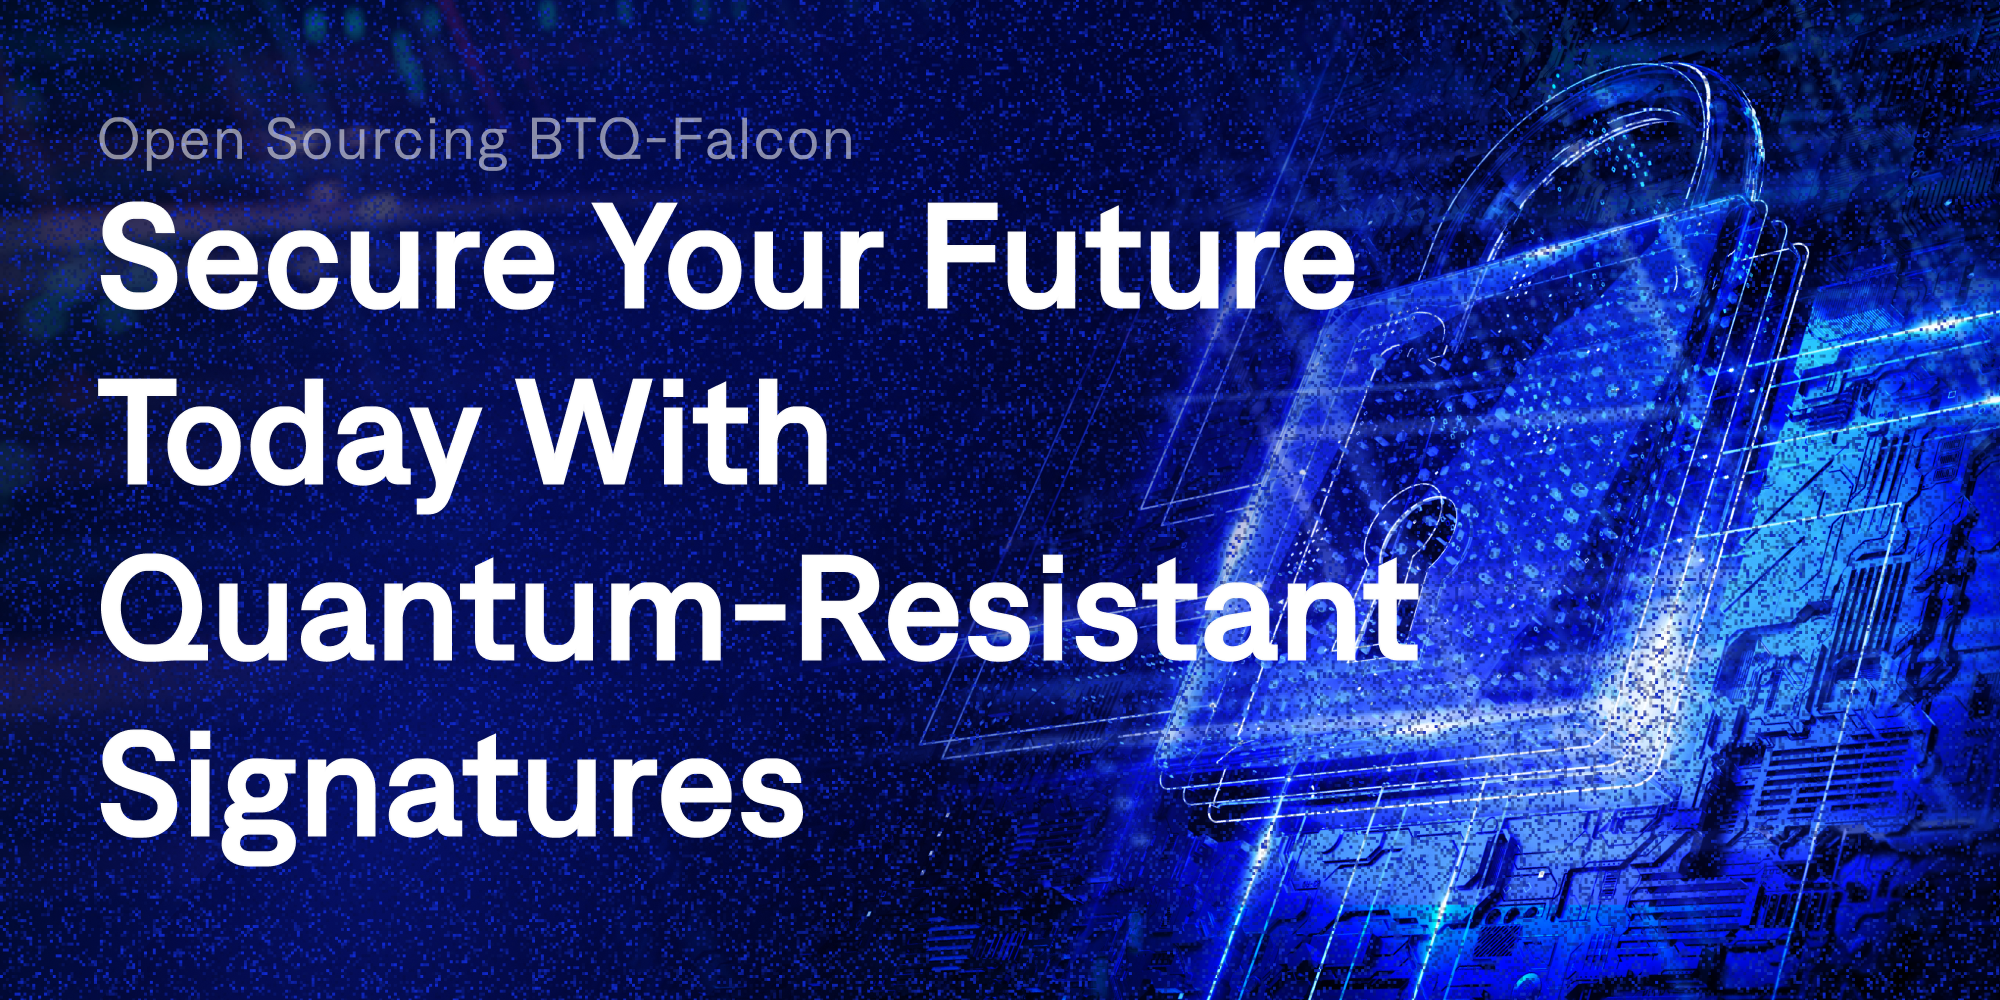 Open Sourcing BTQ-Falcon: Secure Your Future Today With Quantum-Resistant Signatures